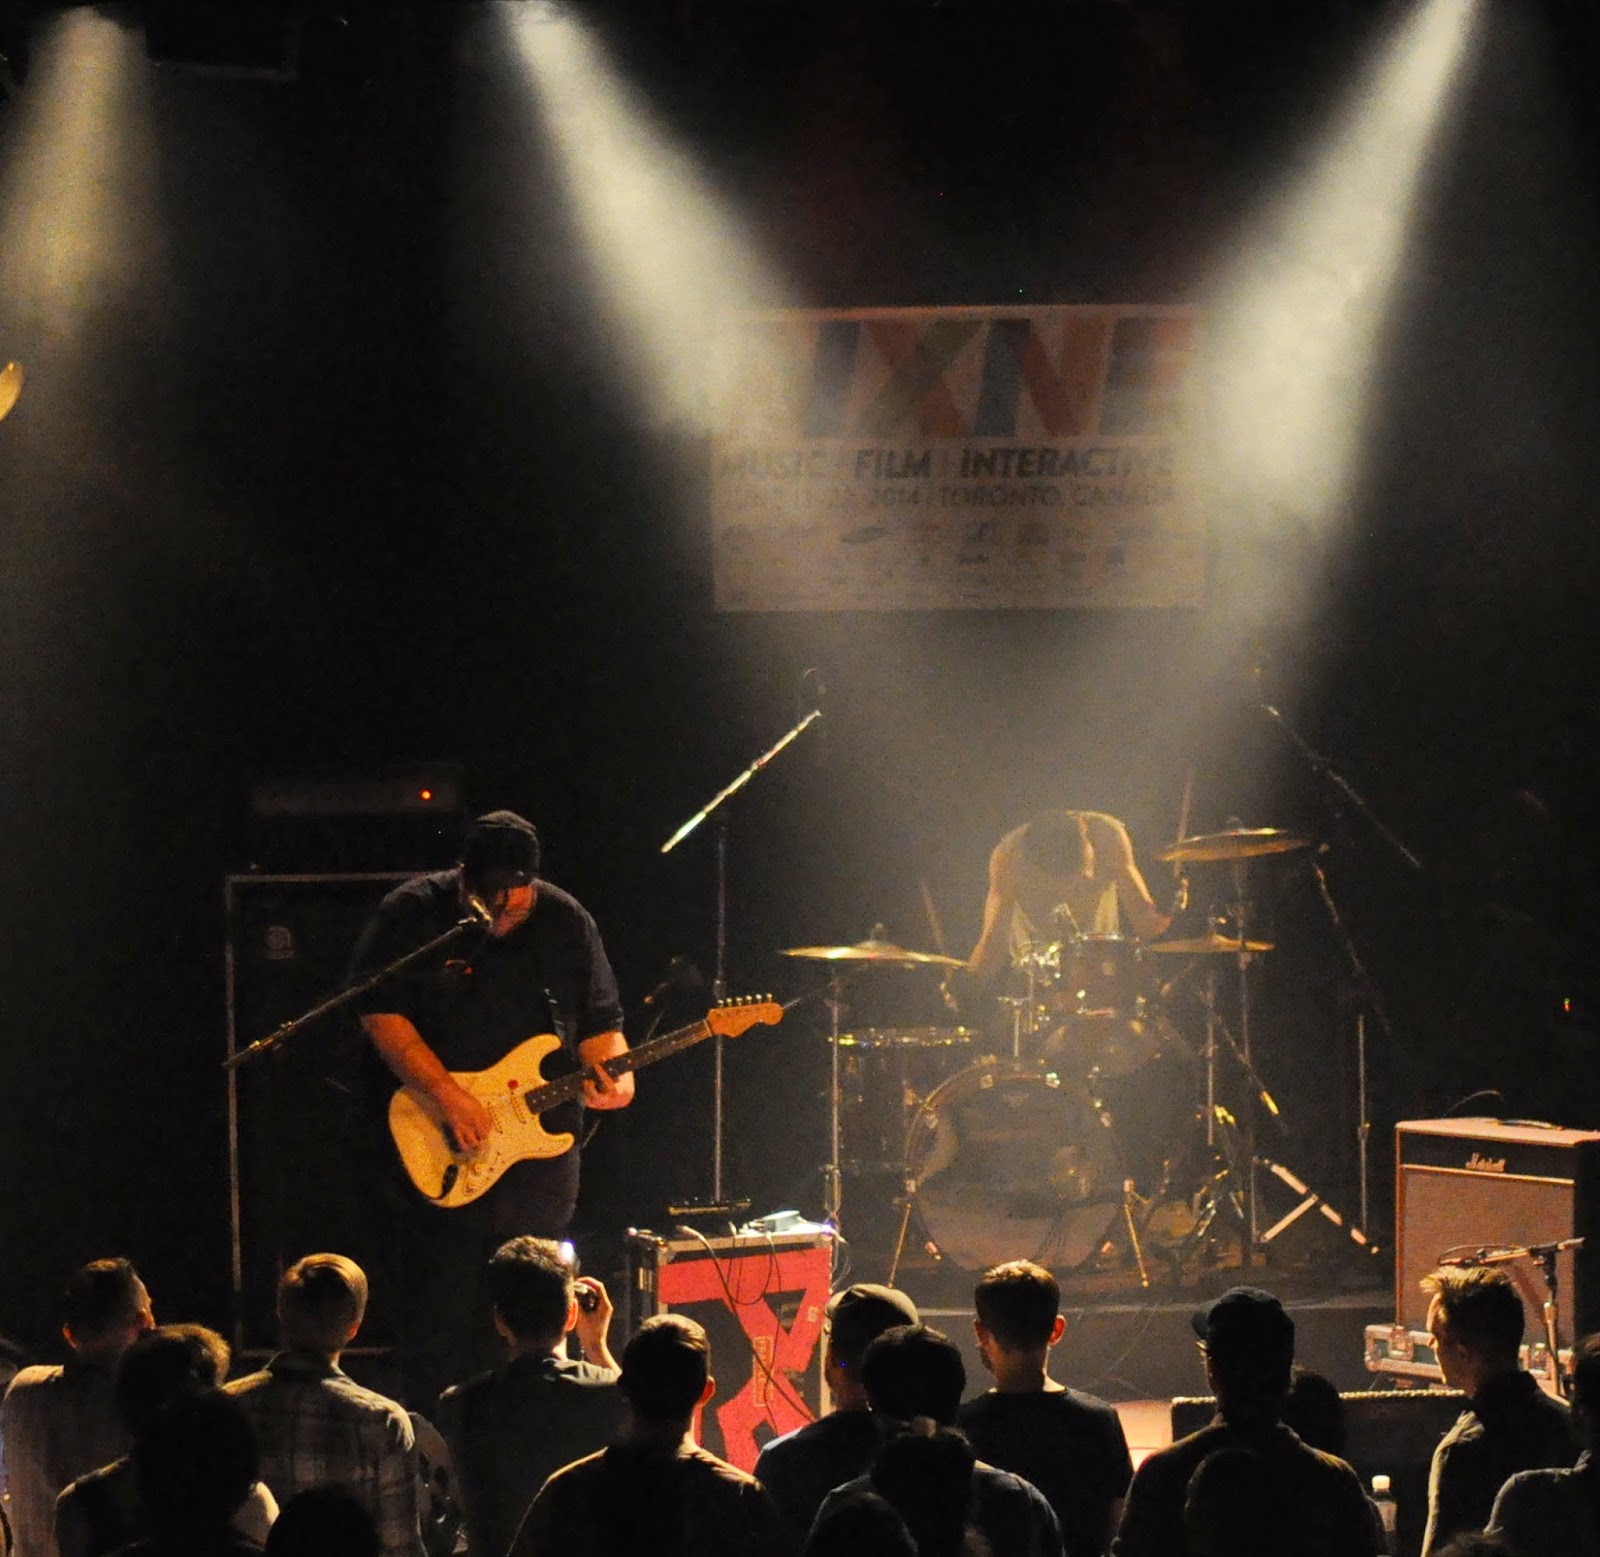 The Mod Club Theatre hosted PS I Love You for NXNE 2014.